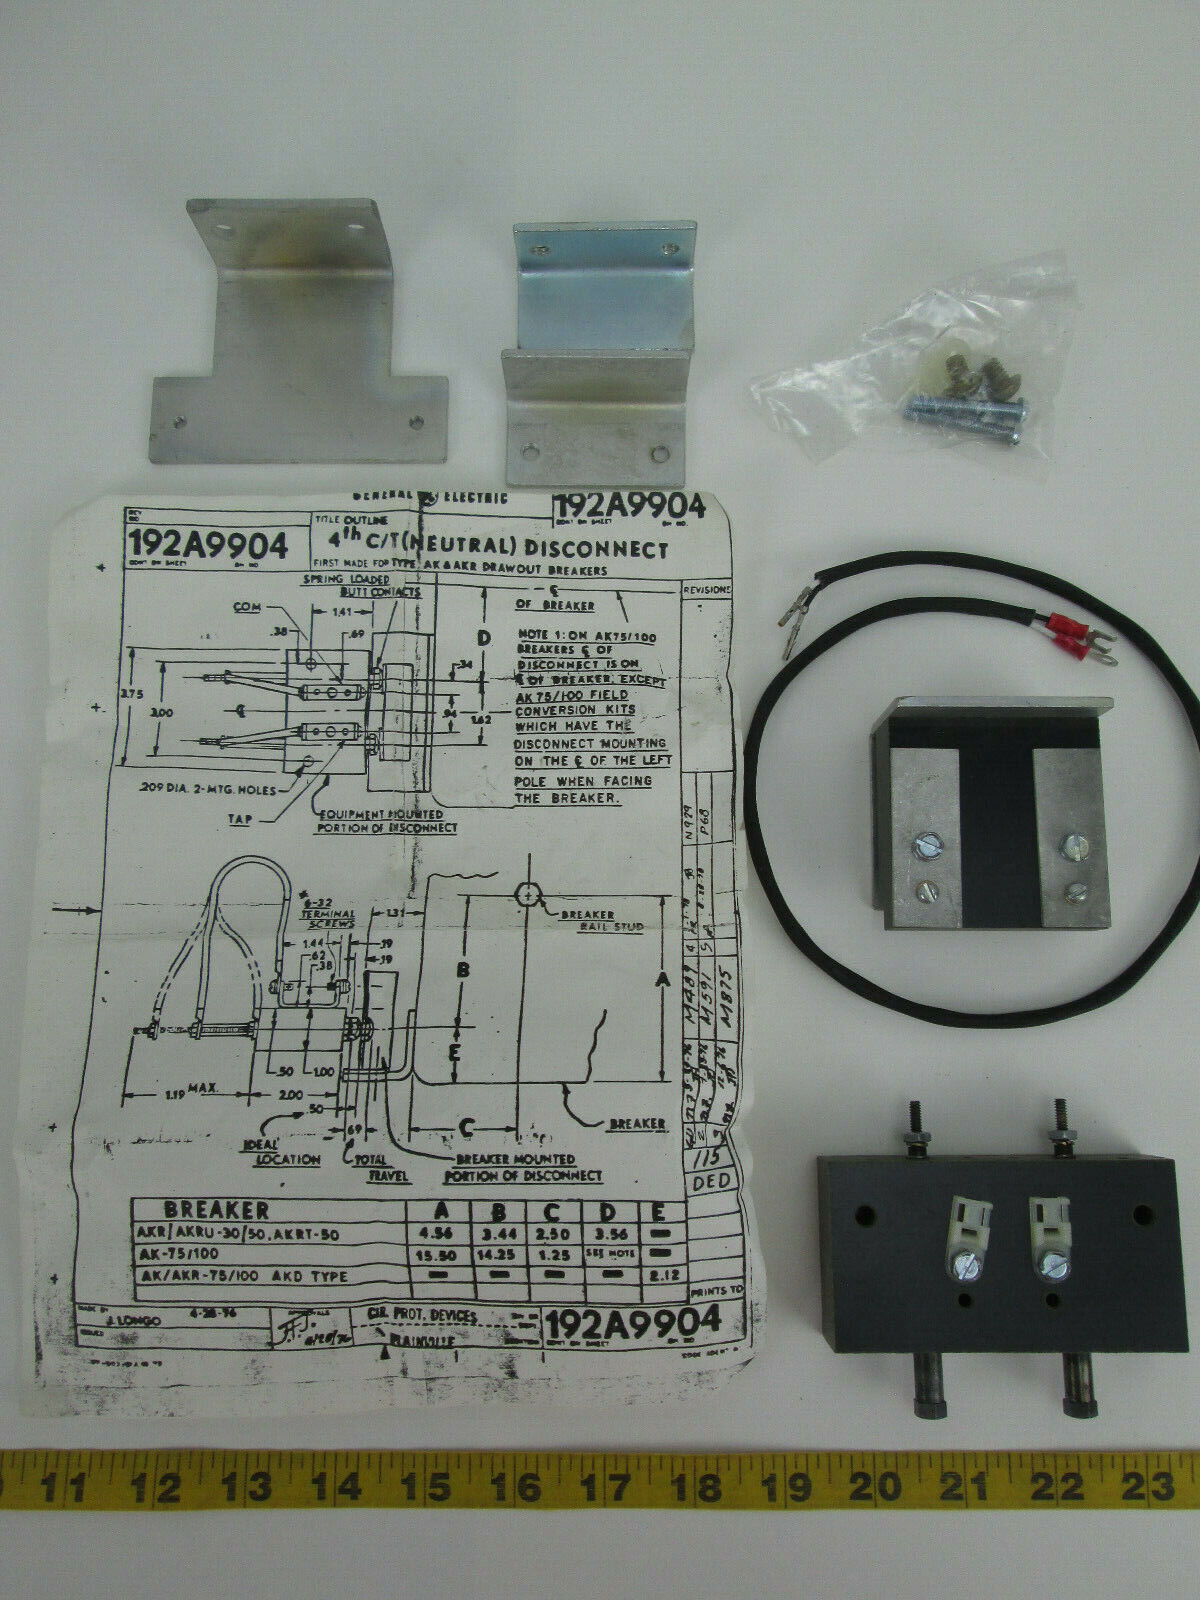 NOS GE General Electric 4th C/T (Neutral) Disconnect Kit 192A990